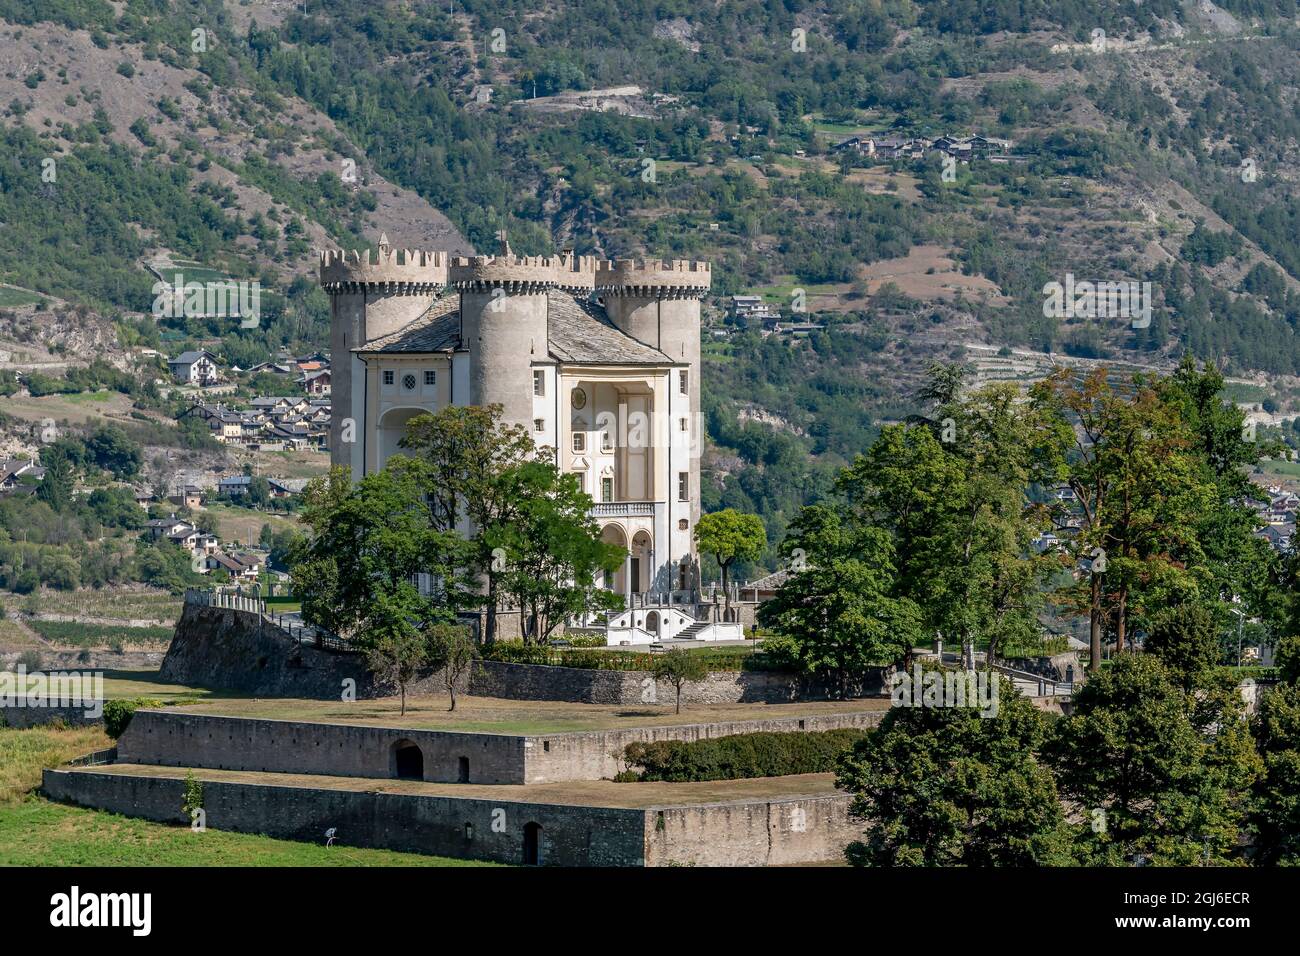 The ancient castle of Aymavilles, Aosta Valley, Italy, completely immersed in the surrounding nature Stock Photo